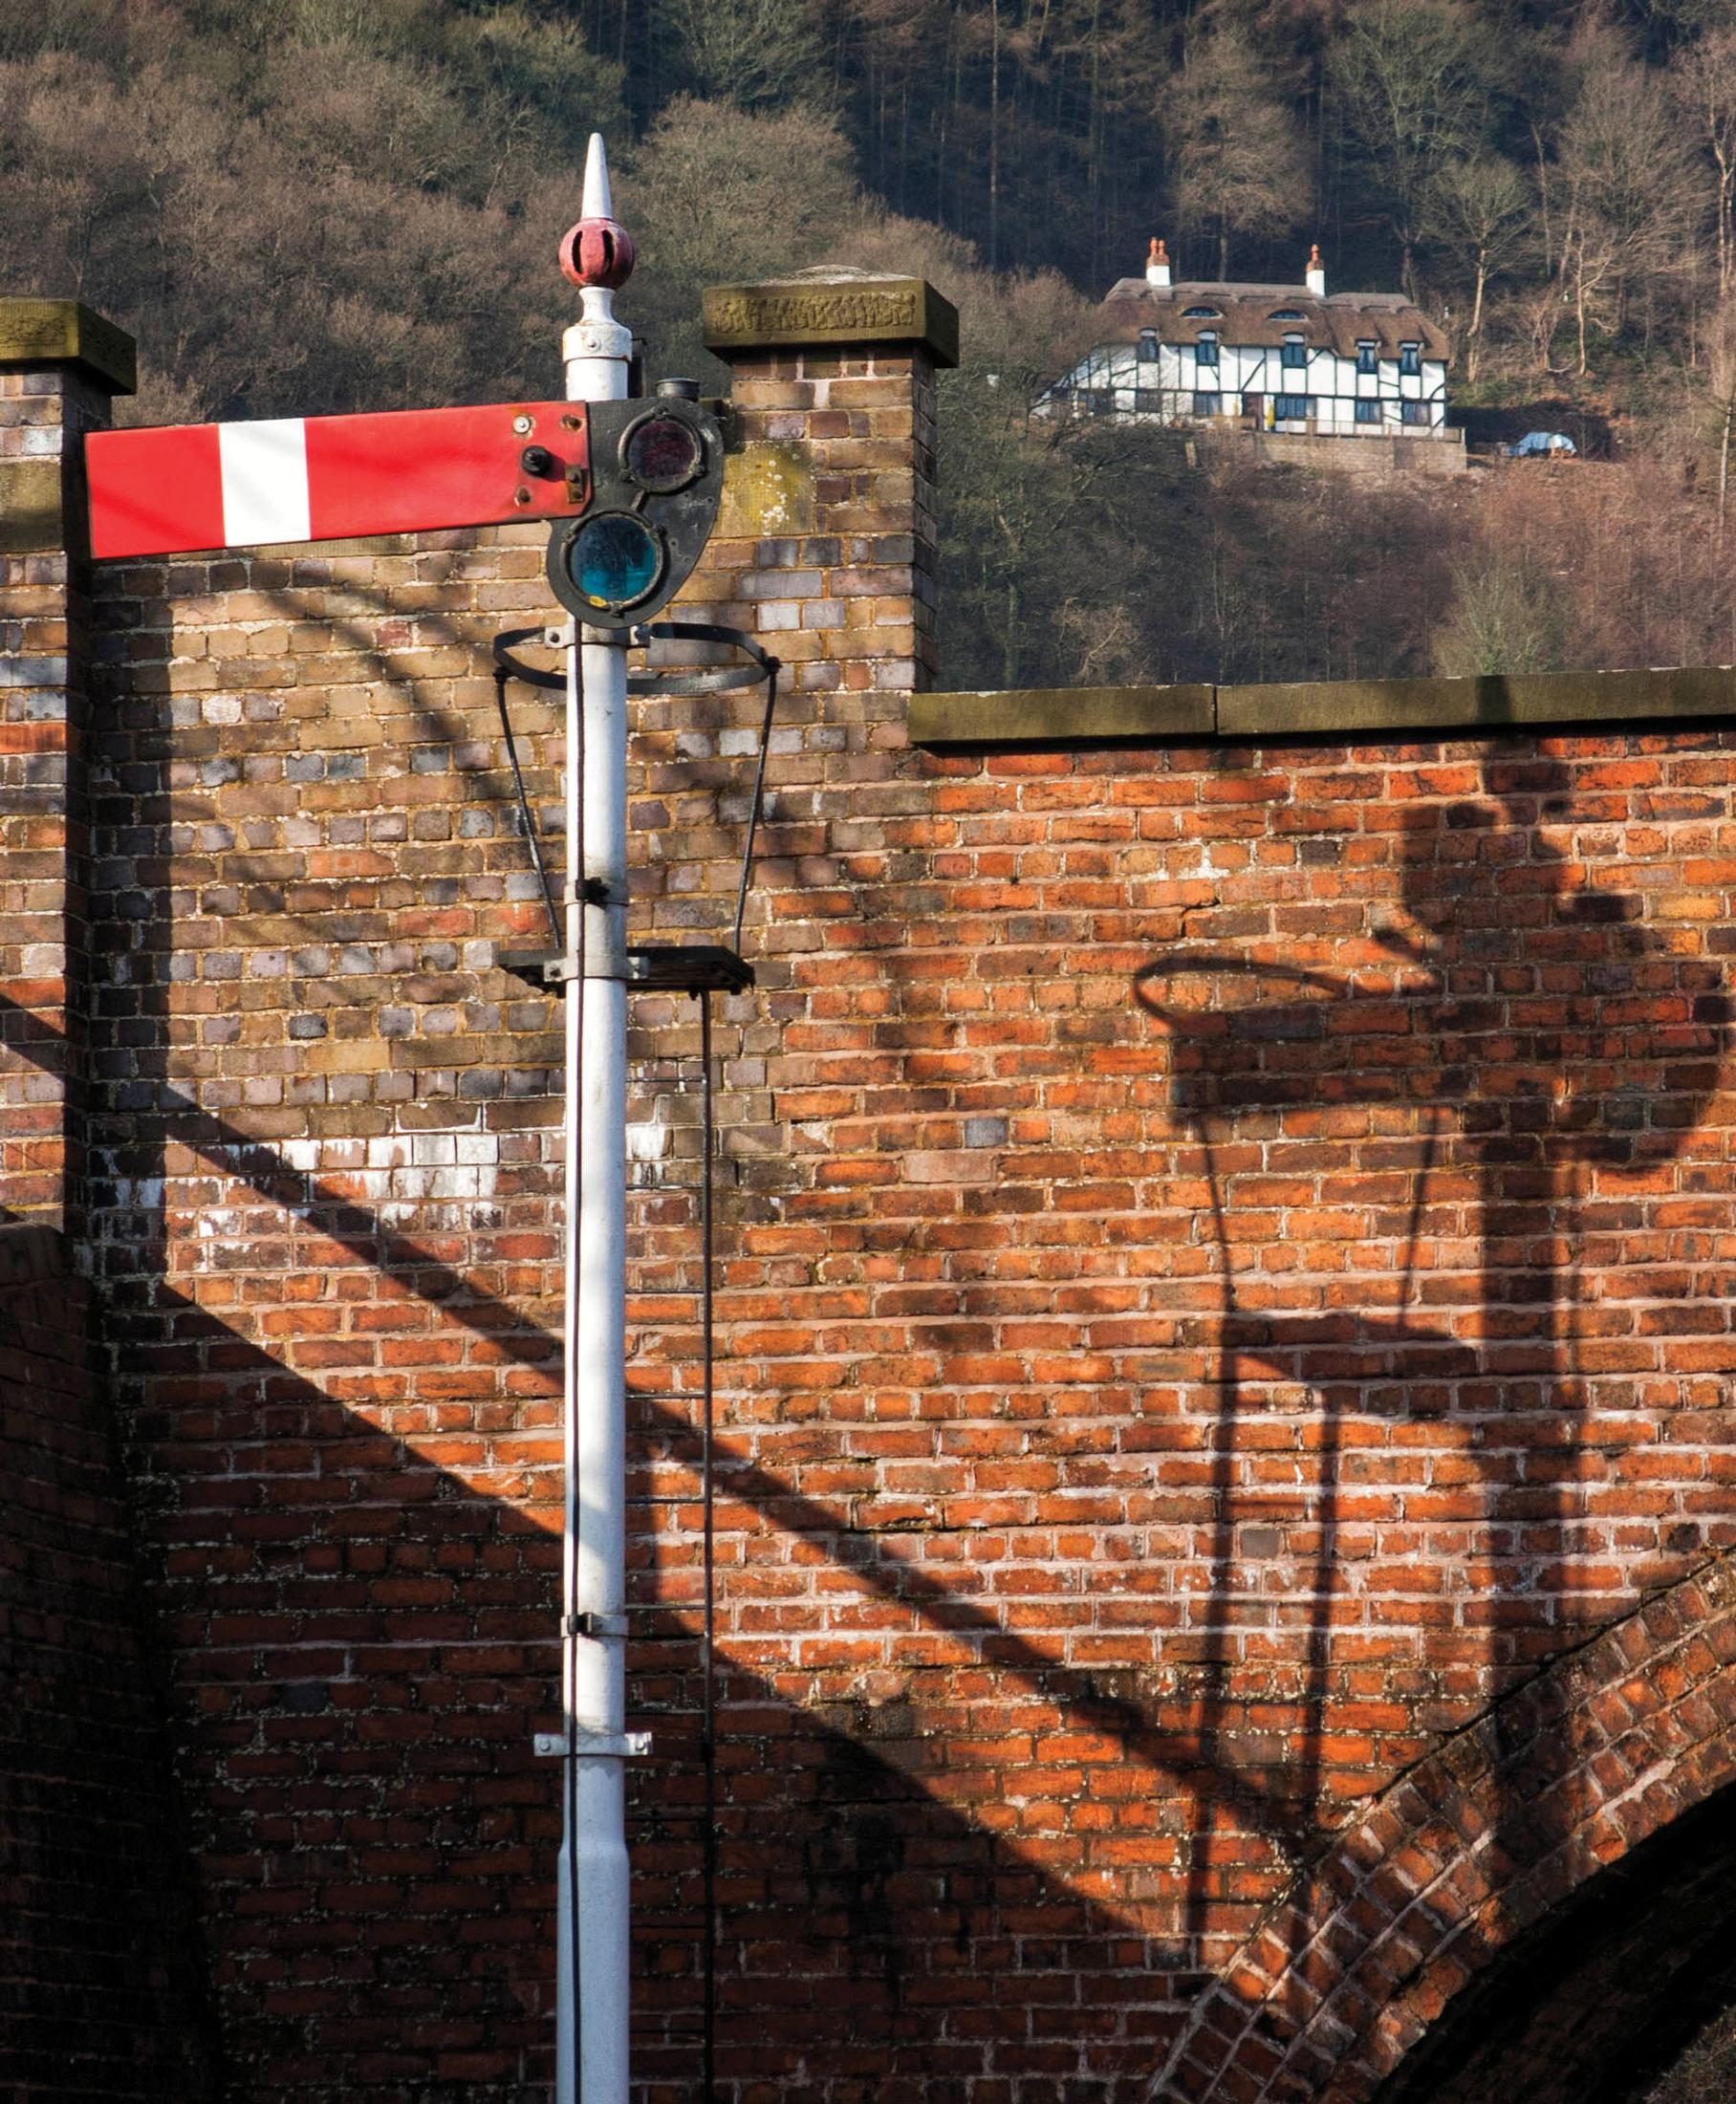 The modernisation of railway signals in Cornwall has been thrown into doubt by Brexit